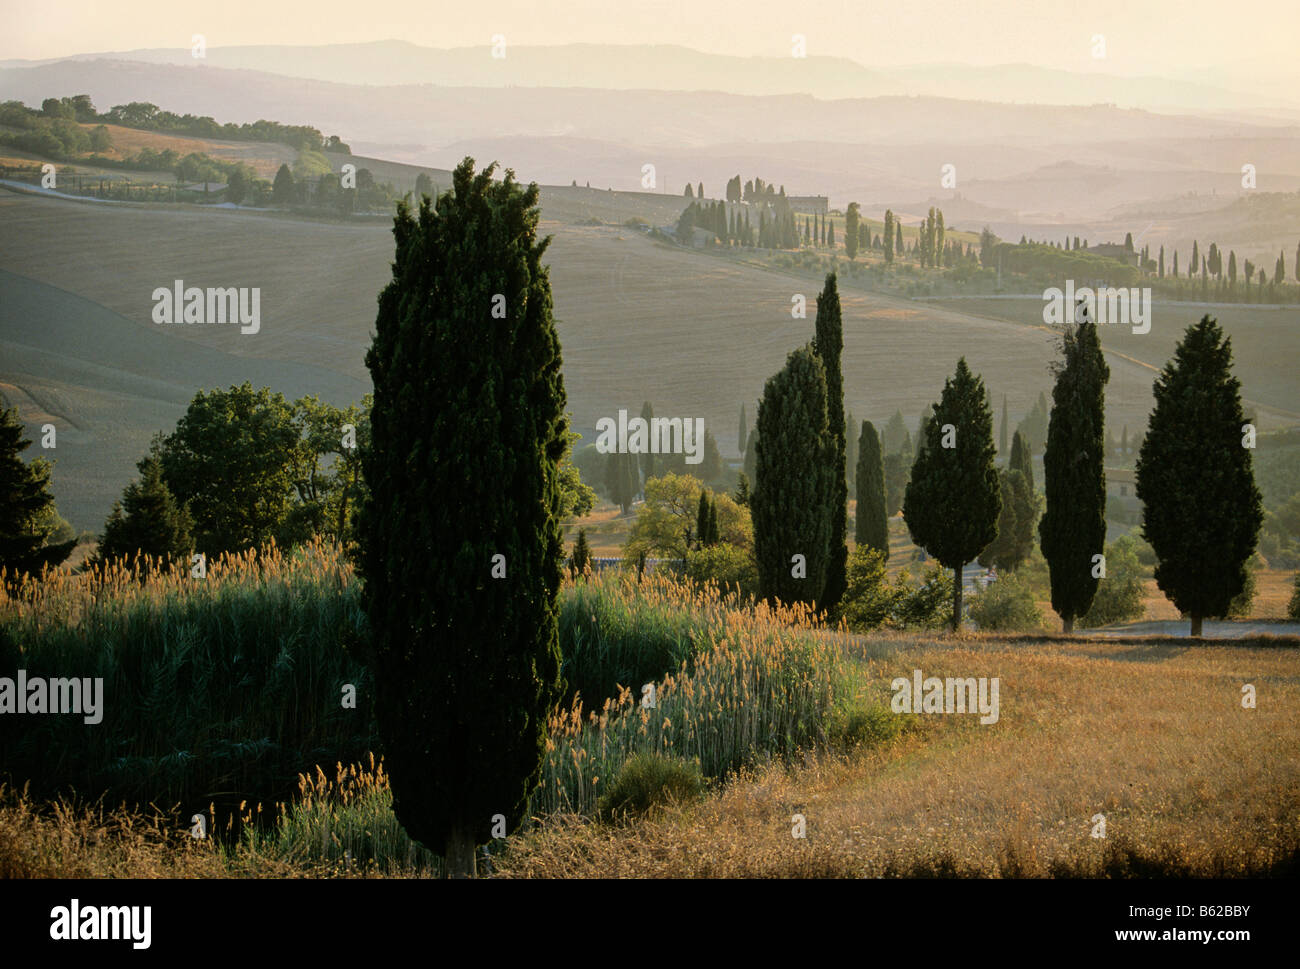 Landscape with cypress trees at dusk, Val d' Orcia near Monticchiello, Province of Siena, Toscany, Italy, Europe Stock Photo